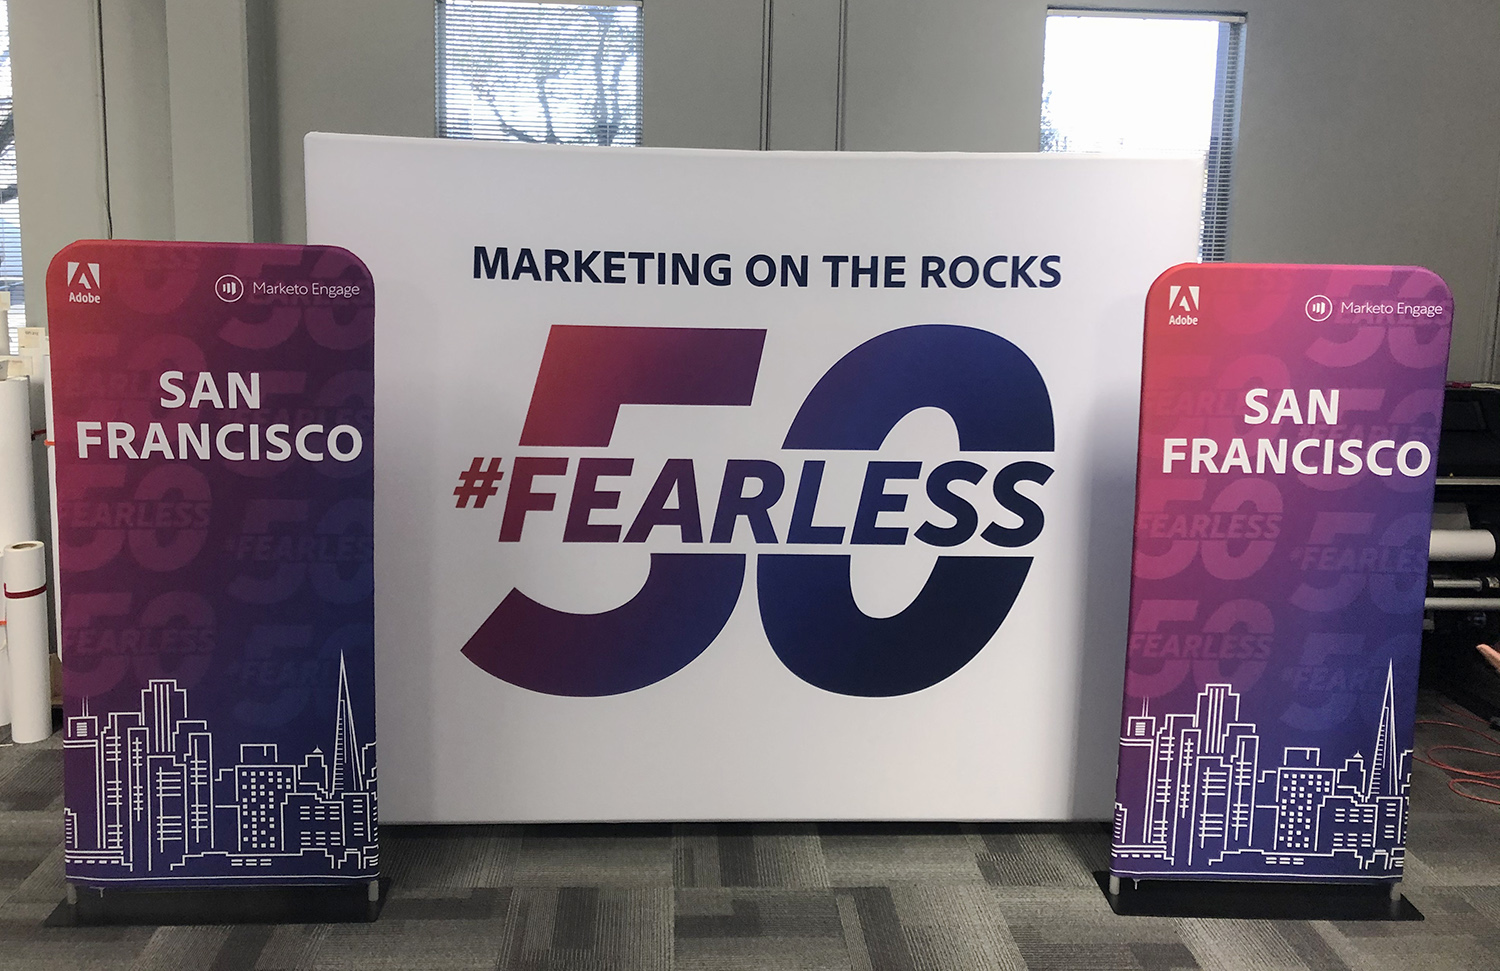 Marketing on the Rocks 50 Fearless advertising display